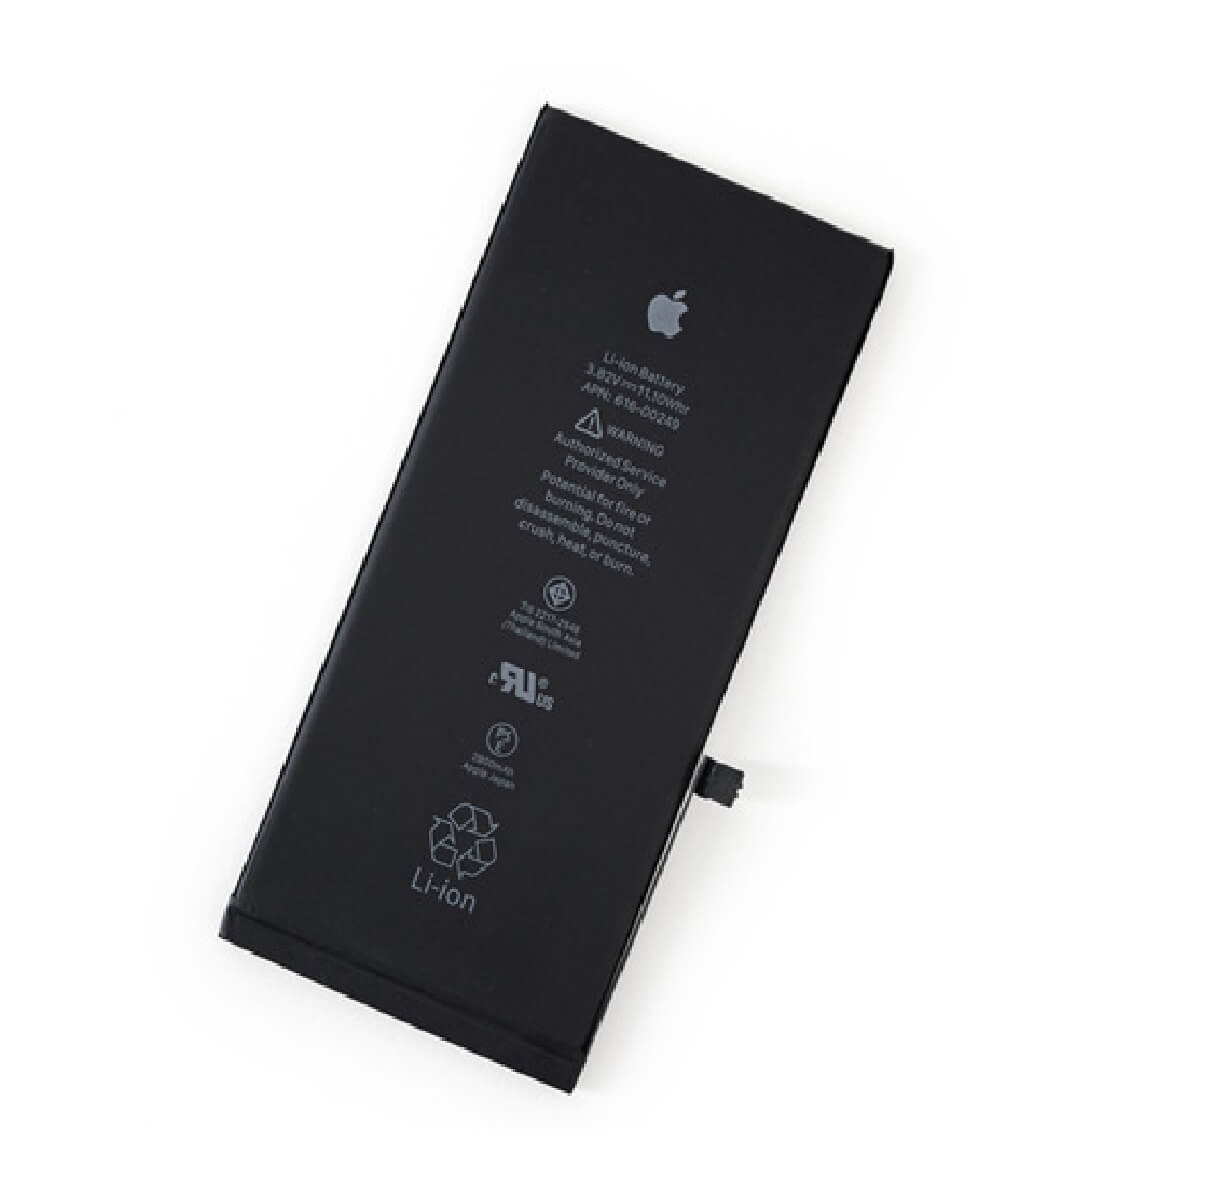 iPhone 8 Plus Battery Replacement at Low Price in Chennai ...